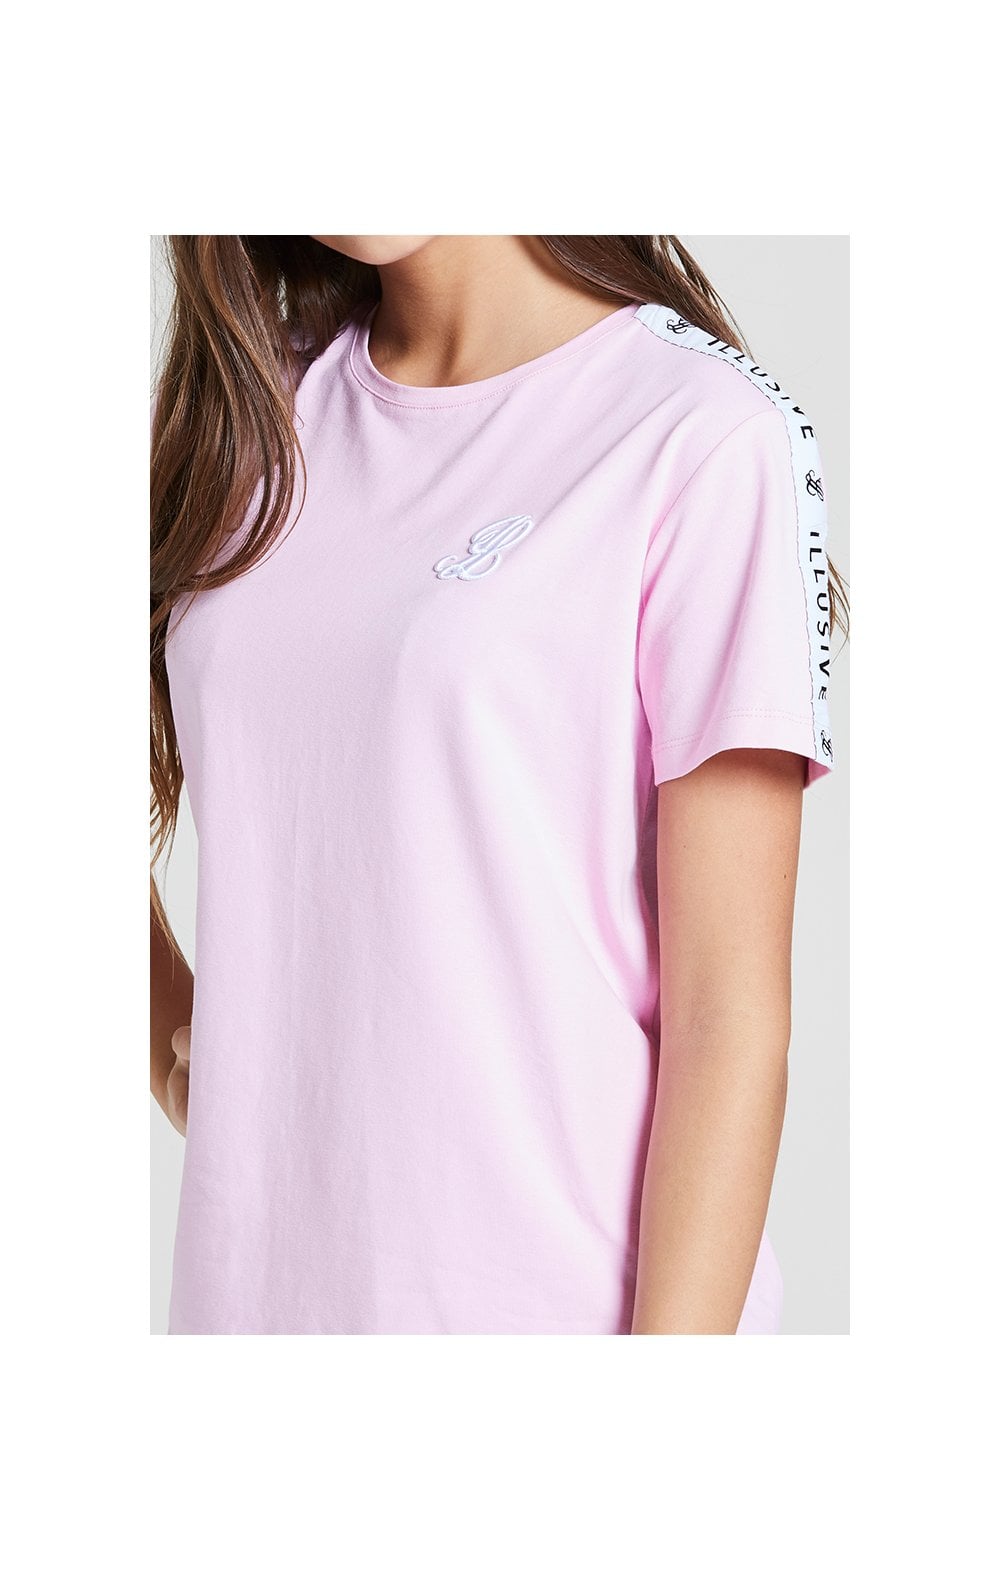 Illusive London BF Fit Taped Tee - Pink (1)